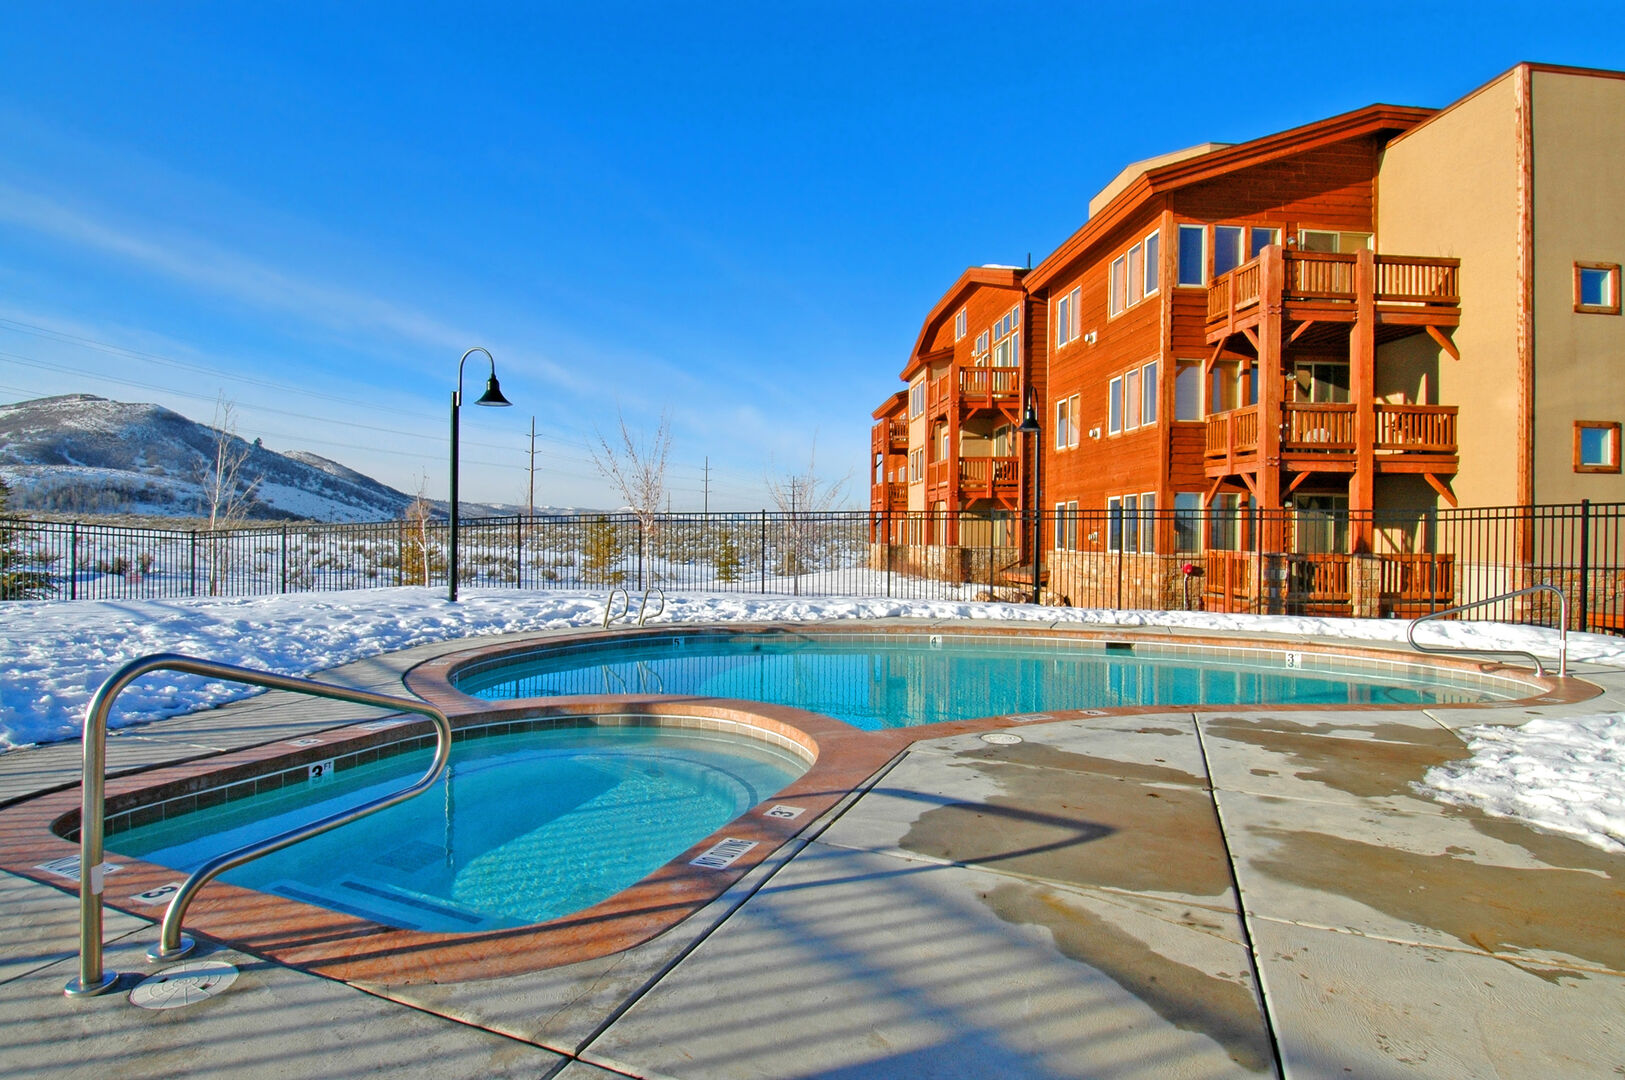 Outdoor Pool / Hot Tub at the Crestview Clubhouse located between buildings B and C.